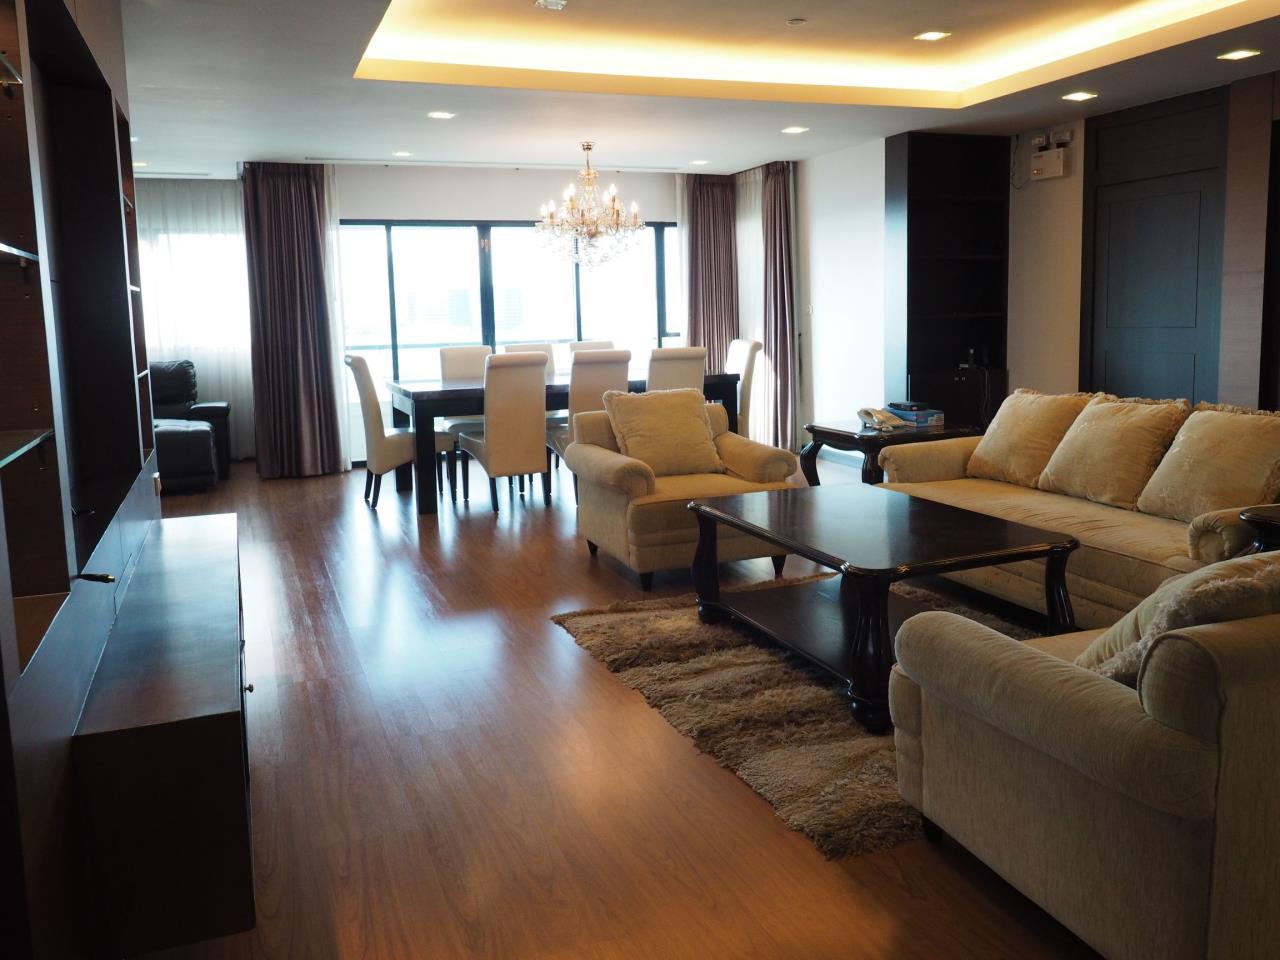 3 Bedrooms 3 Bathrooms Size 200.12 at Sathorn Gardens for Rent